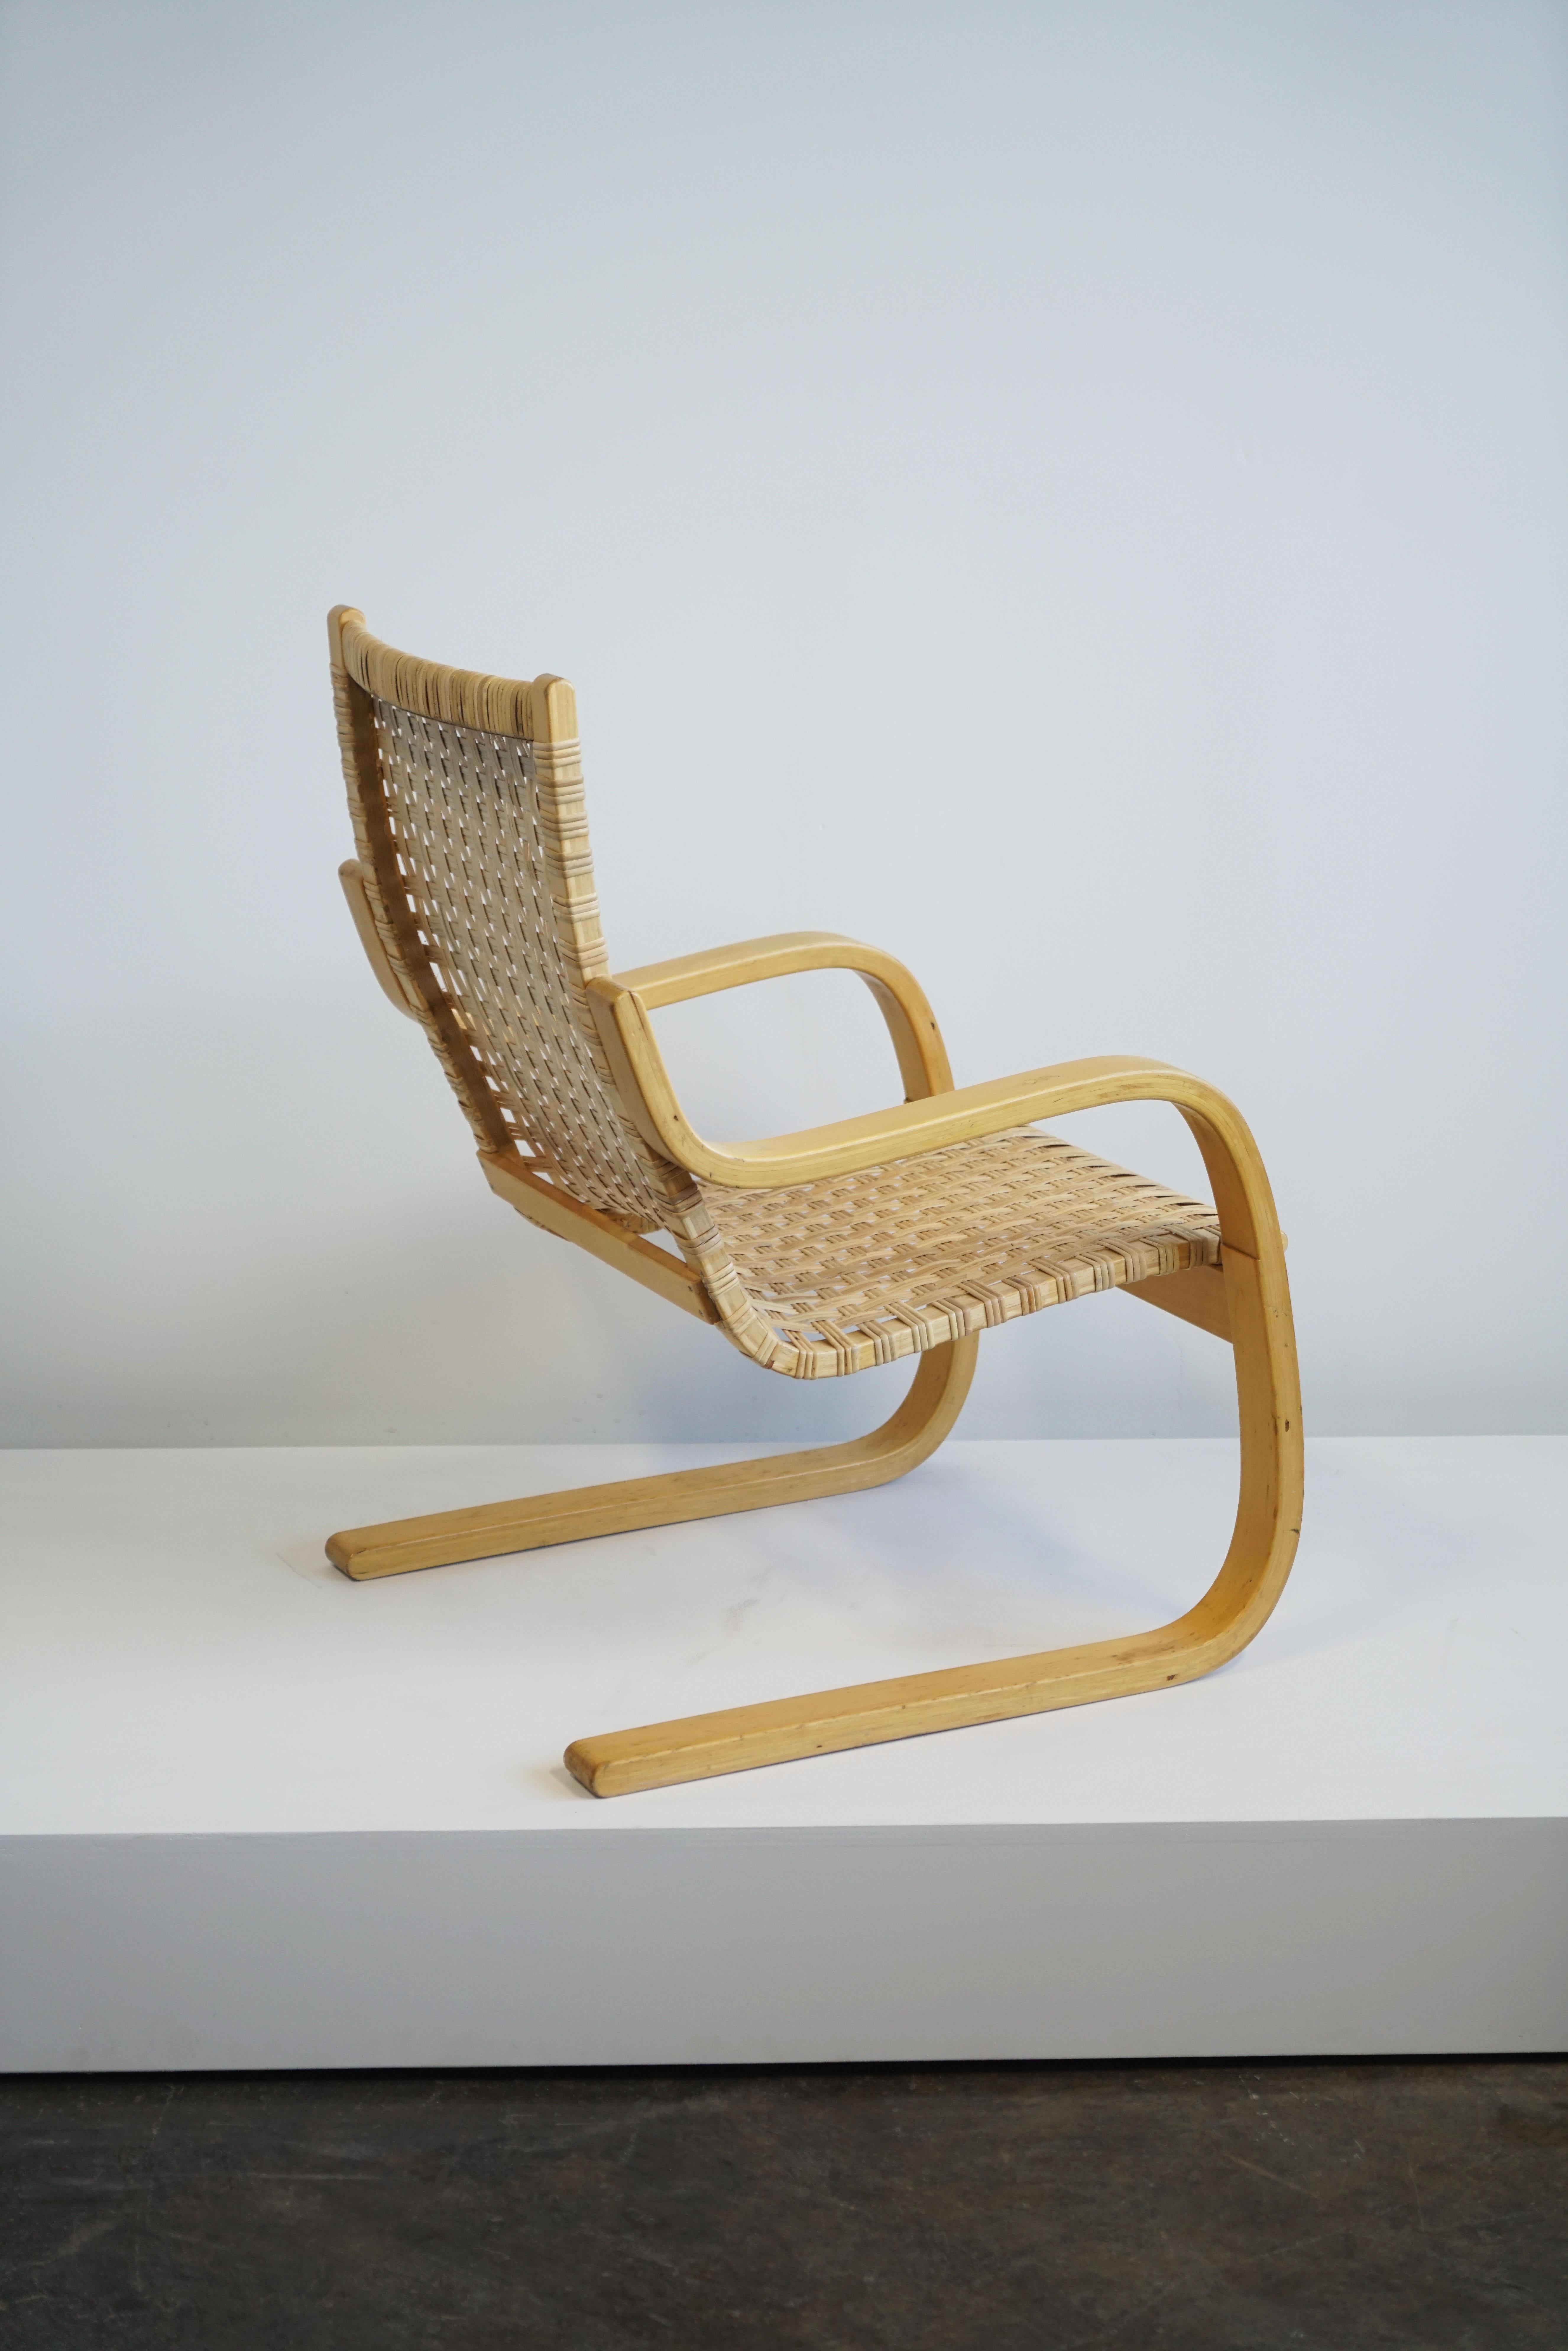 1960 Alvar Aalto Cantilever Chair Model 406 by Artek in Birch and Cane Webbing For Sale 2